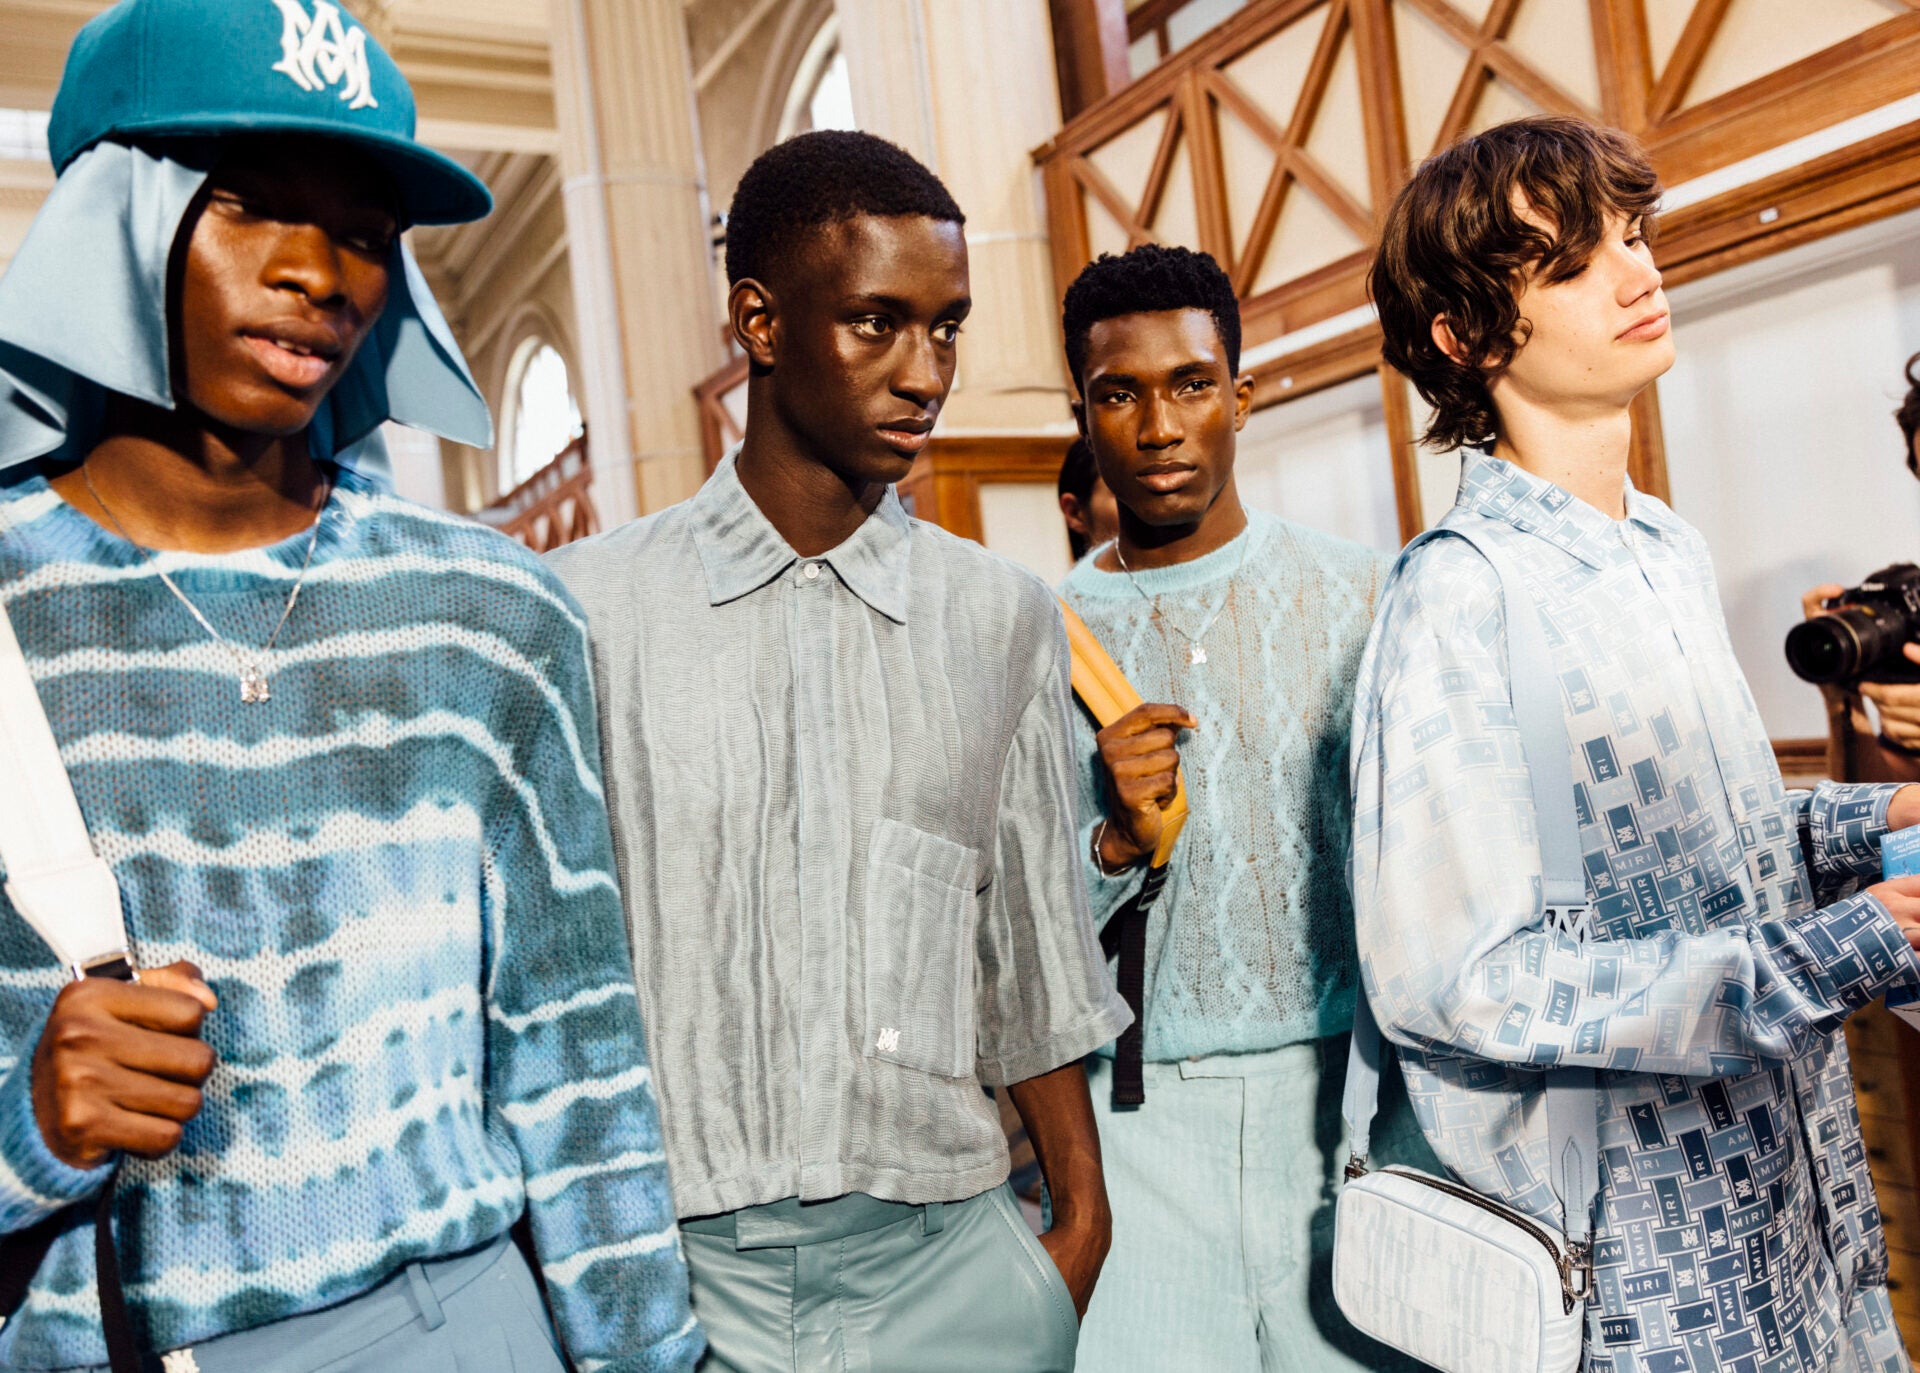 The Menswear Trends That Dominated at Paris Fashion Week